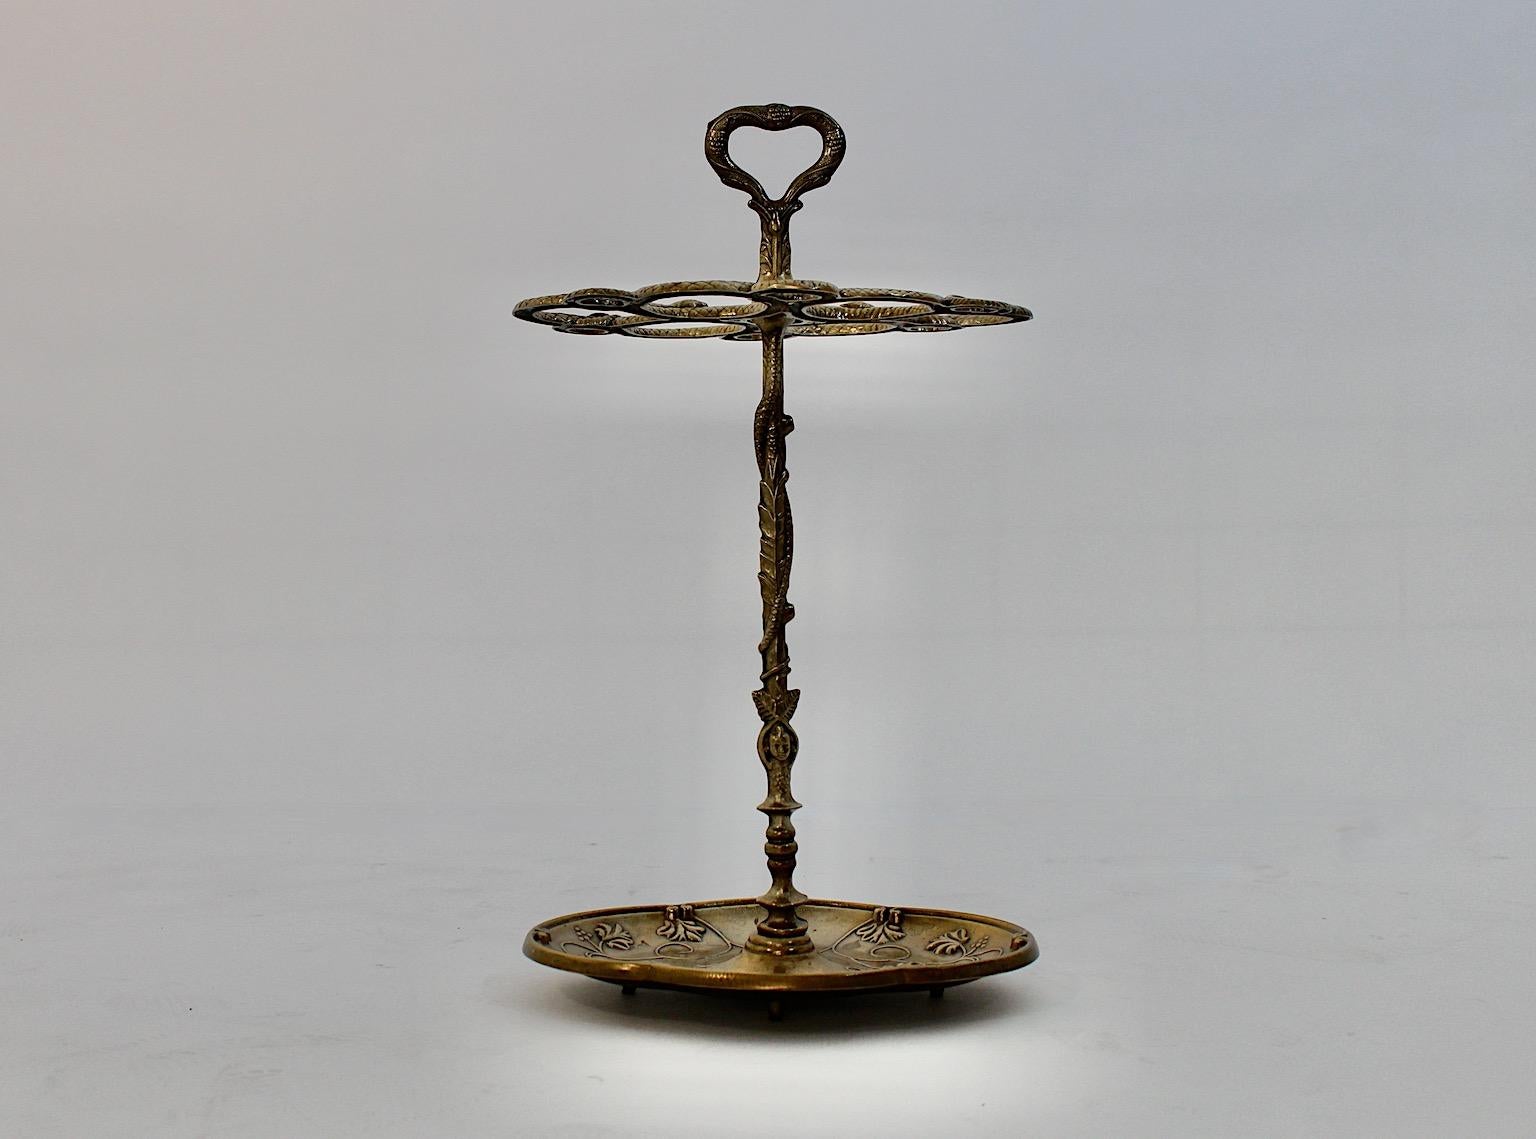 Hollywood Regency Style vintage umbrella stand from cast brass Italy, 1970s.
A wonderful vintage umbrella stand from cast brass with embossed decor as wine grapes, leaves and snakes.
This umbrella stand is characterized through beautiful patina